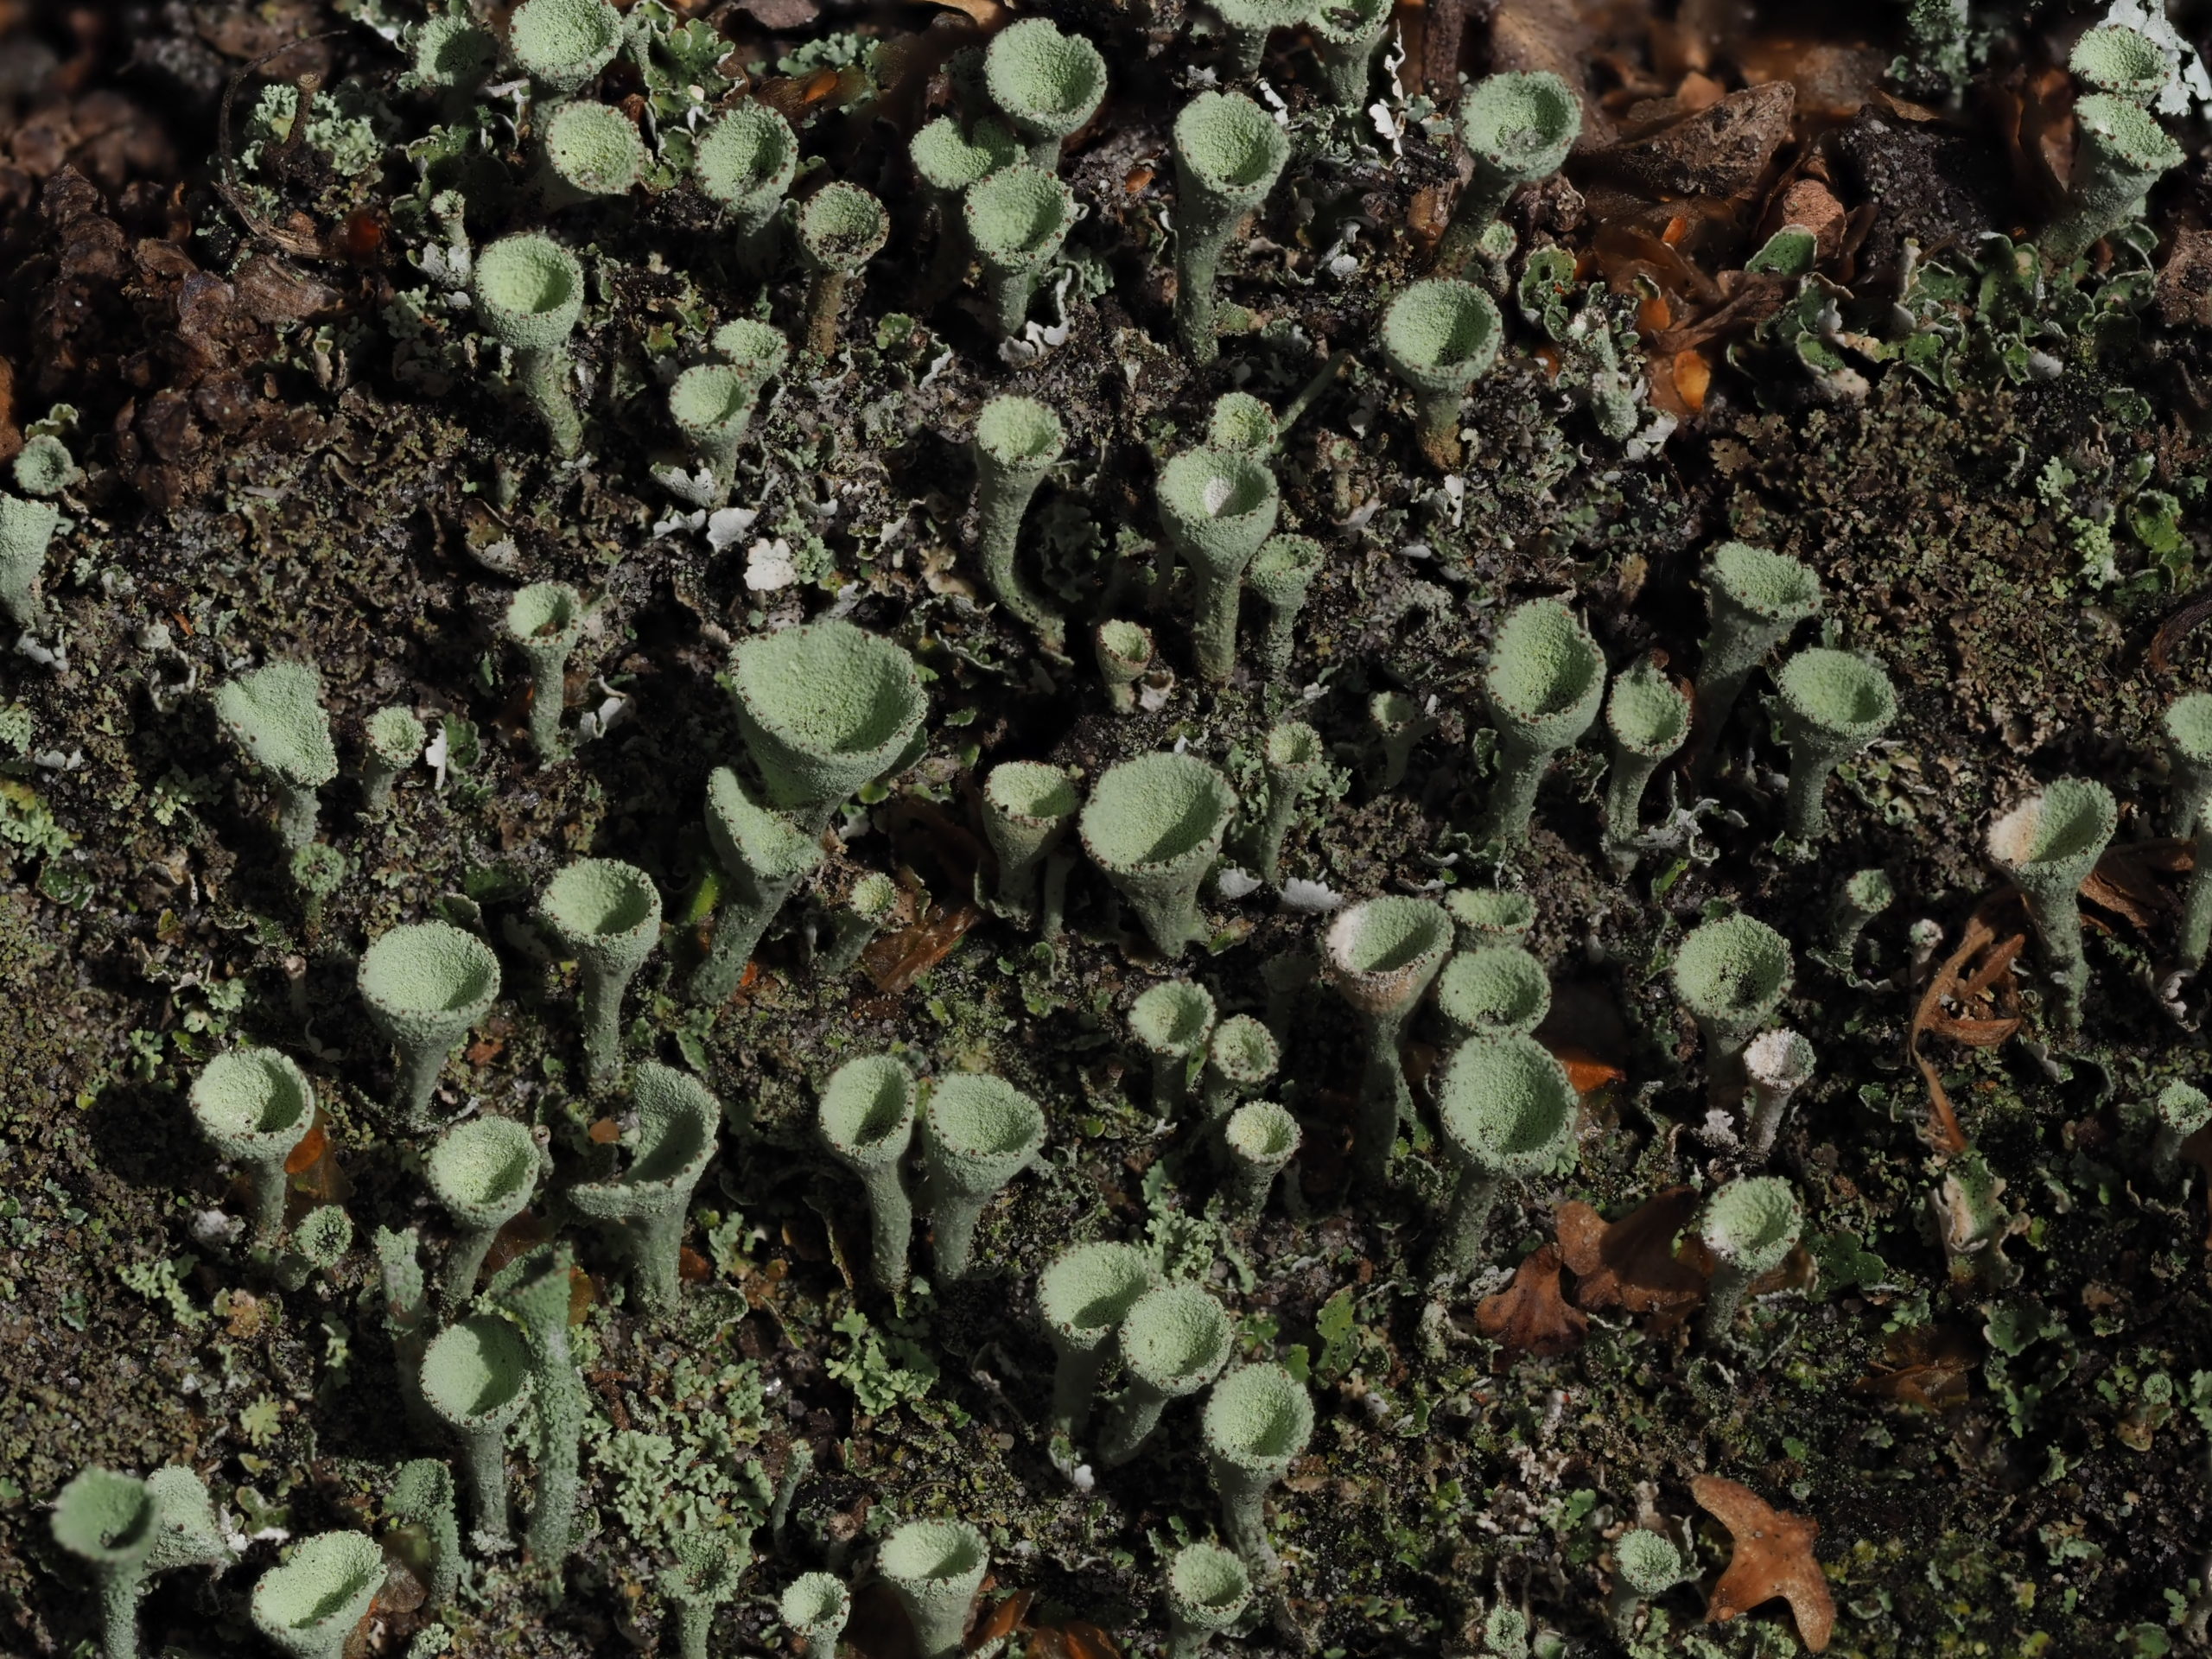 A patch of small green cup-shaped lichen